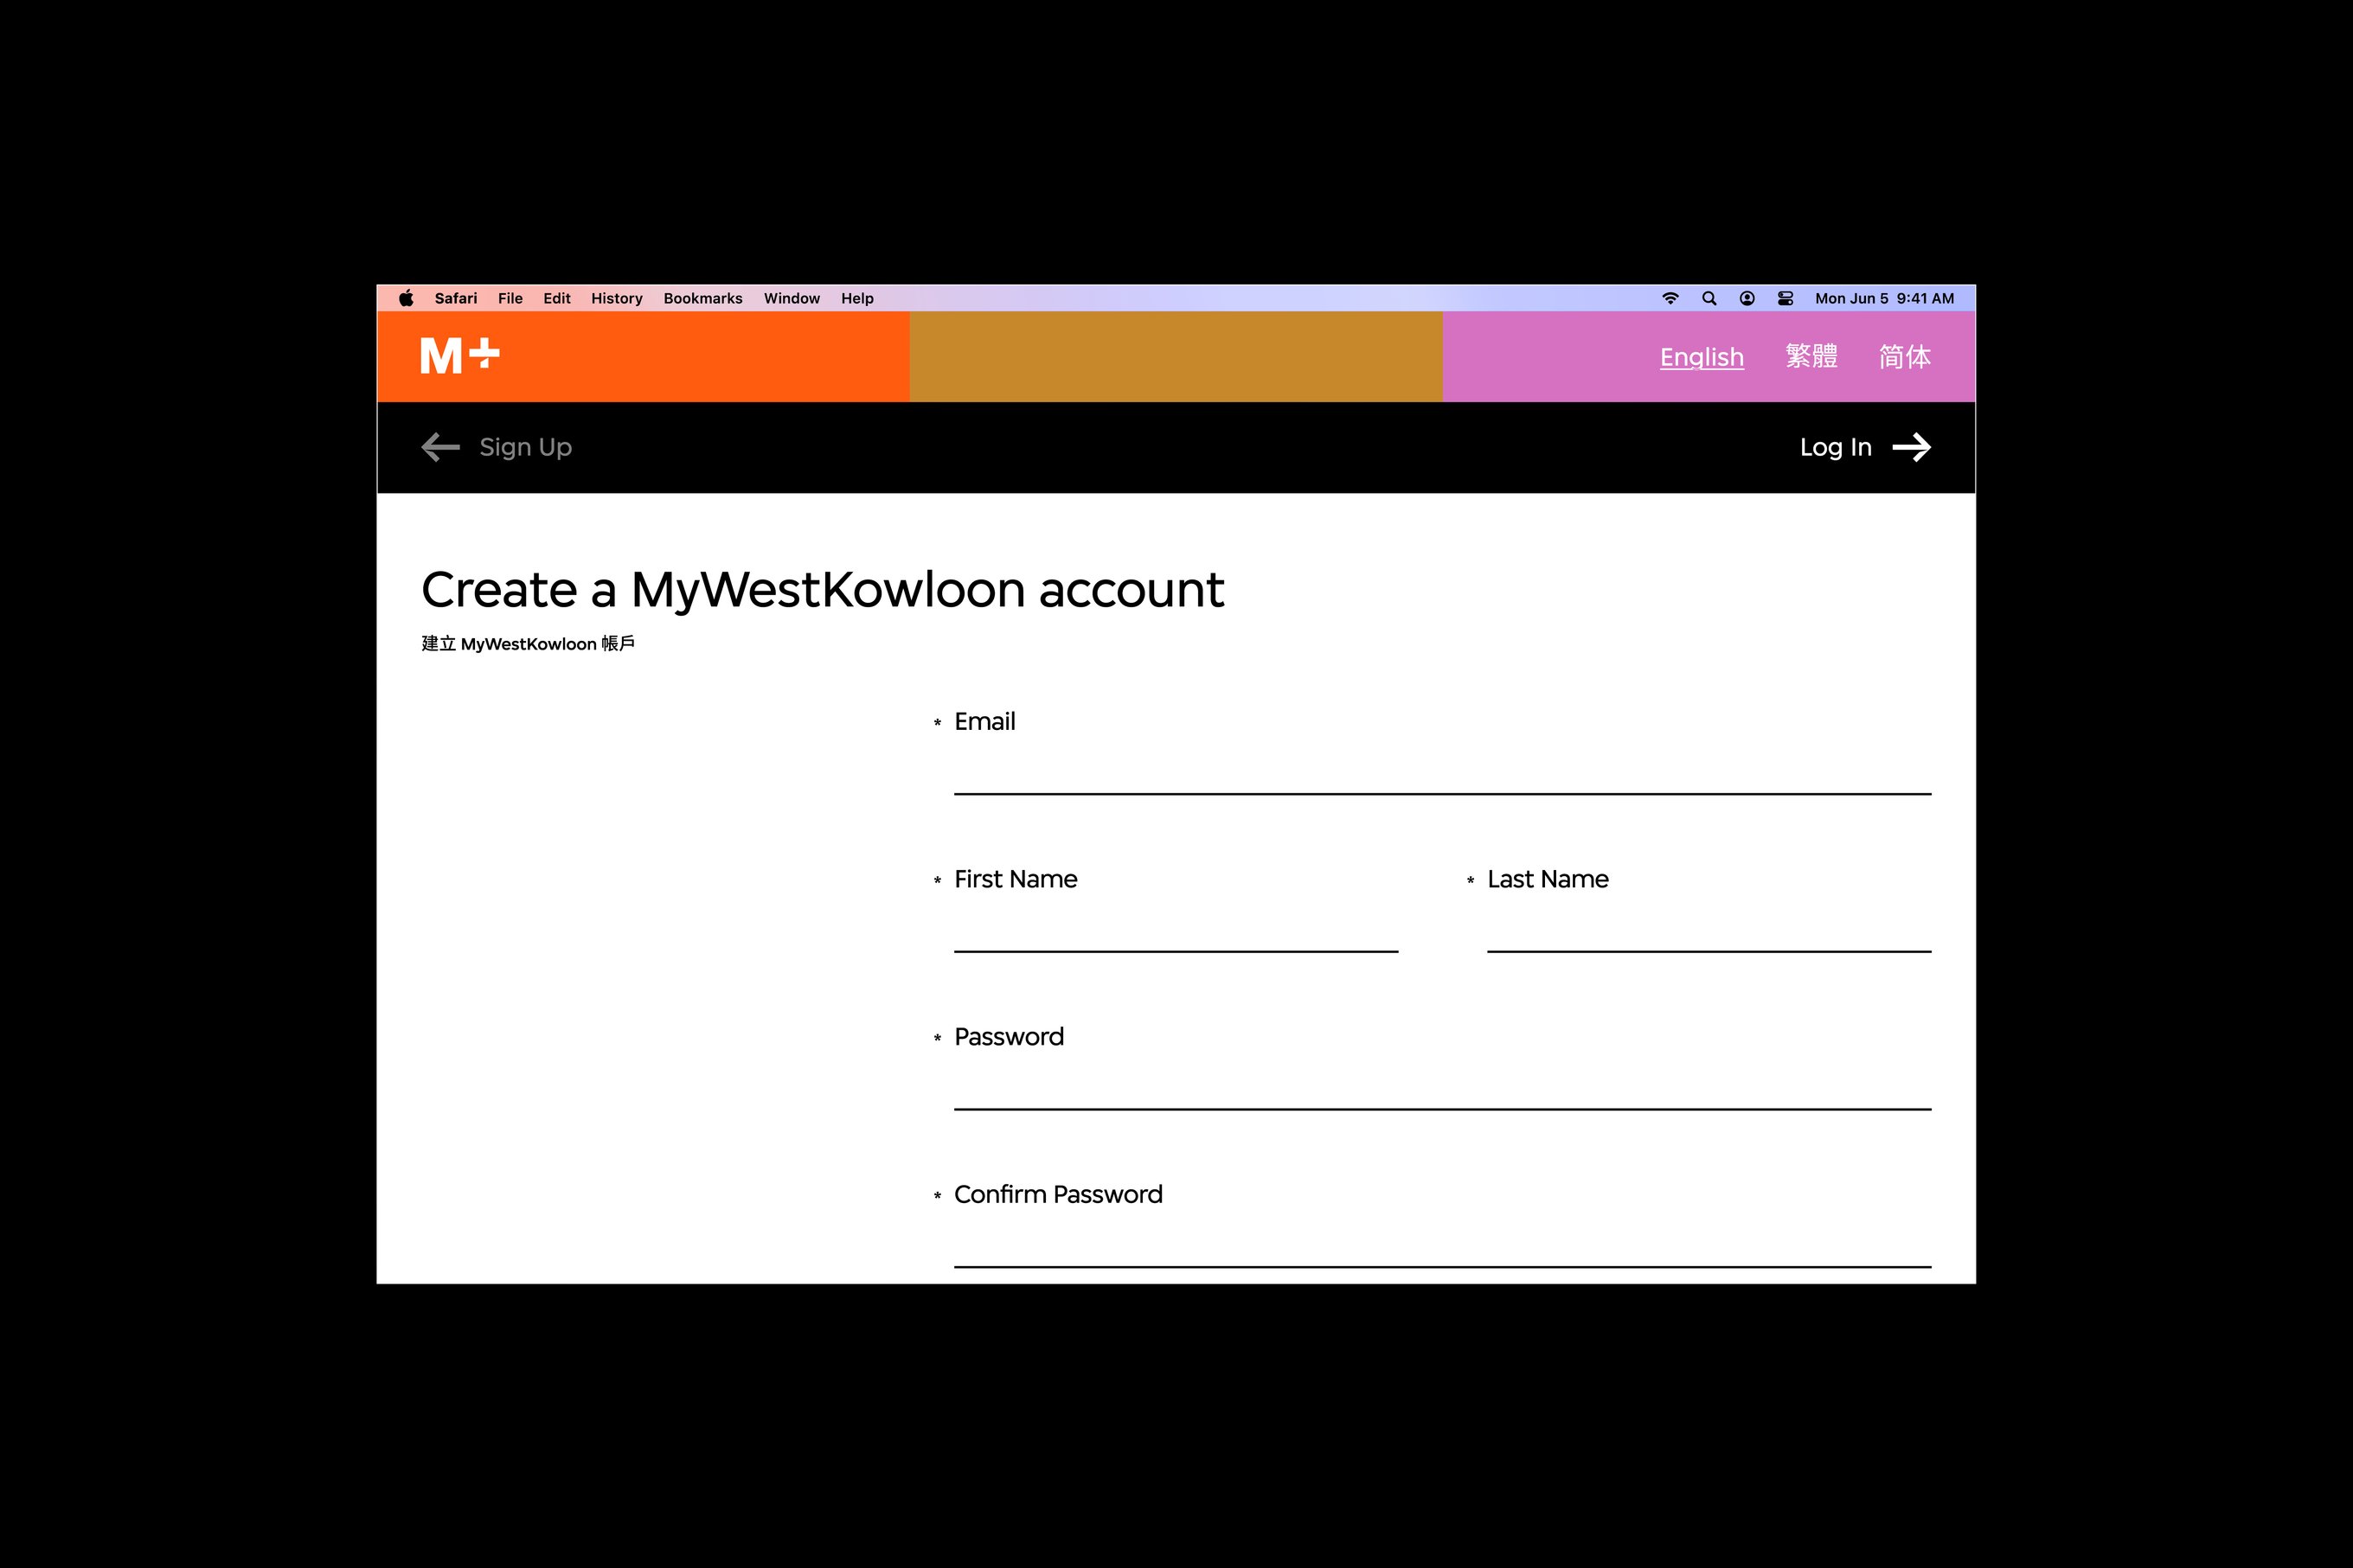 An interface of the M+ Wi-Fi sign up page.